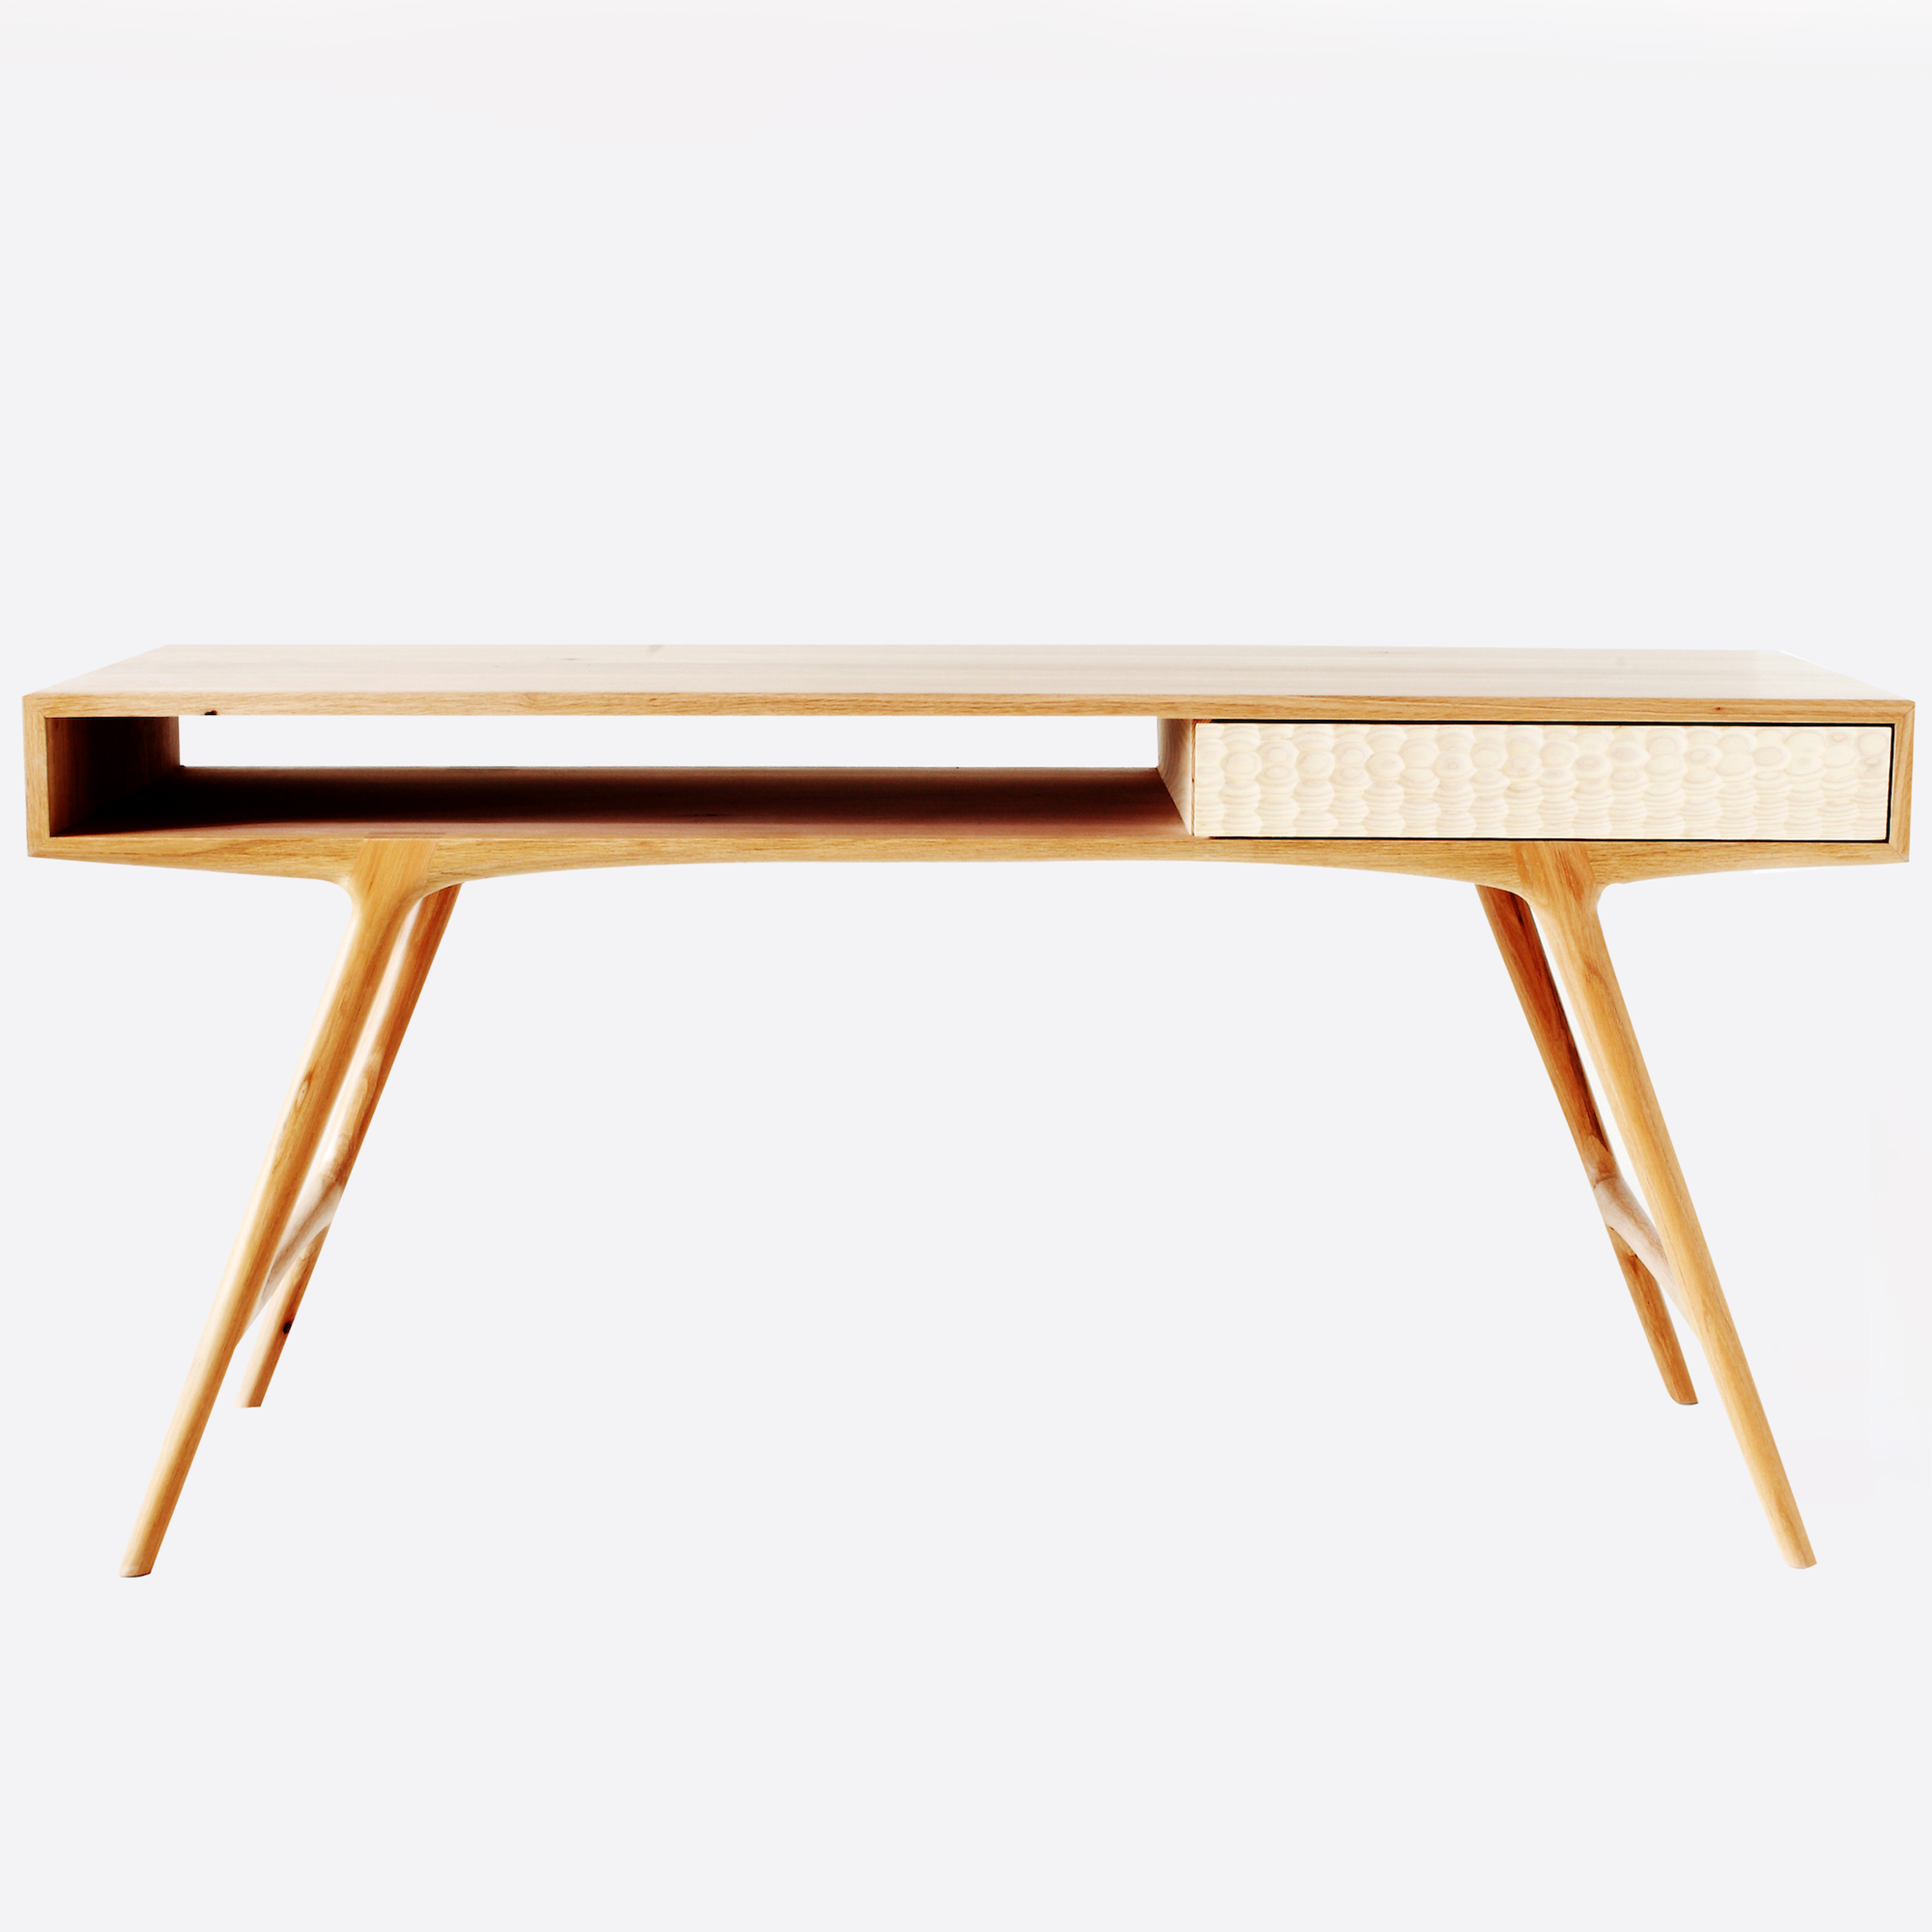 Blacktail Desk by Meyer Von Wielligh Furniture Design. Inspired by South Africa’s national fish, the blacktailor galjoen, this desk is defined by a scale-like pattern that is hand ground onto the wooden surface of the doors.